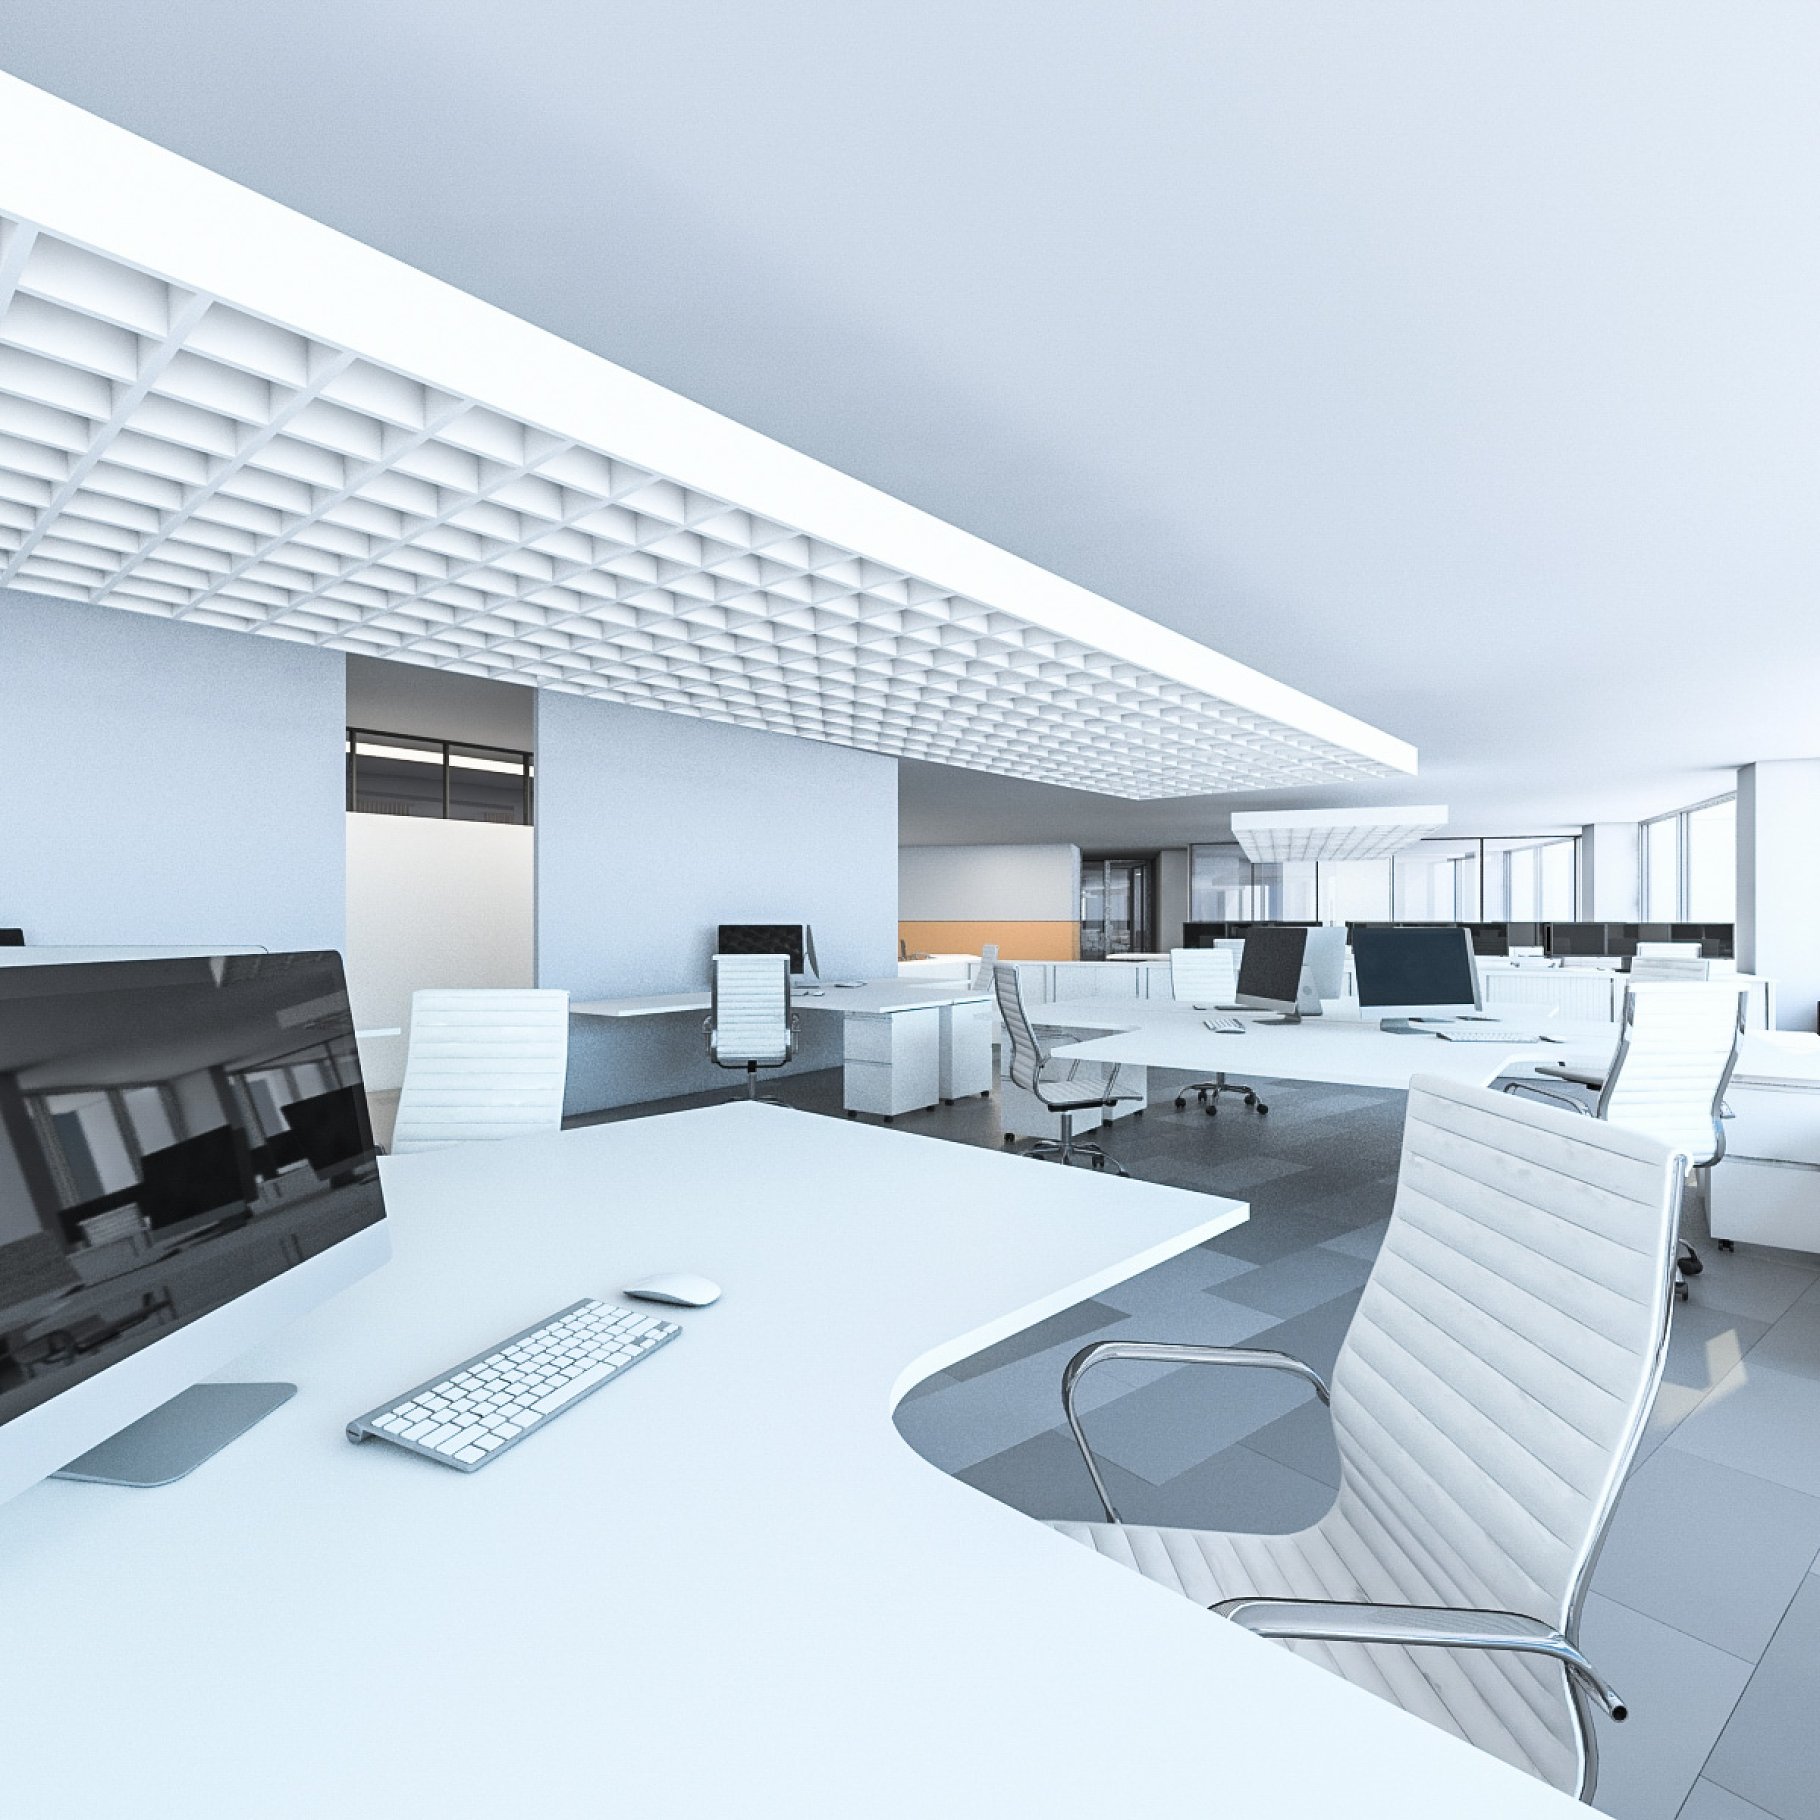 Rendering of an exquisite 3d model of an office interior